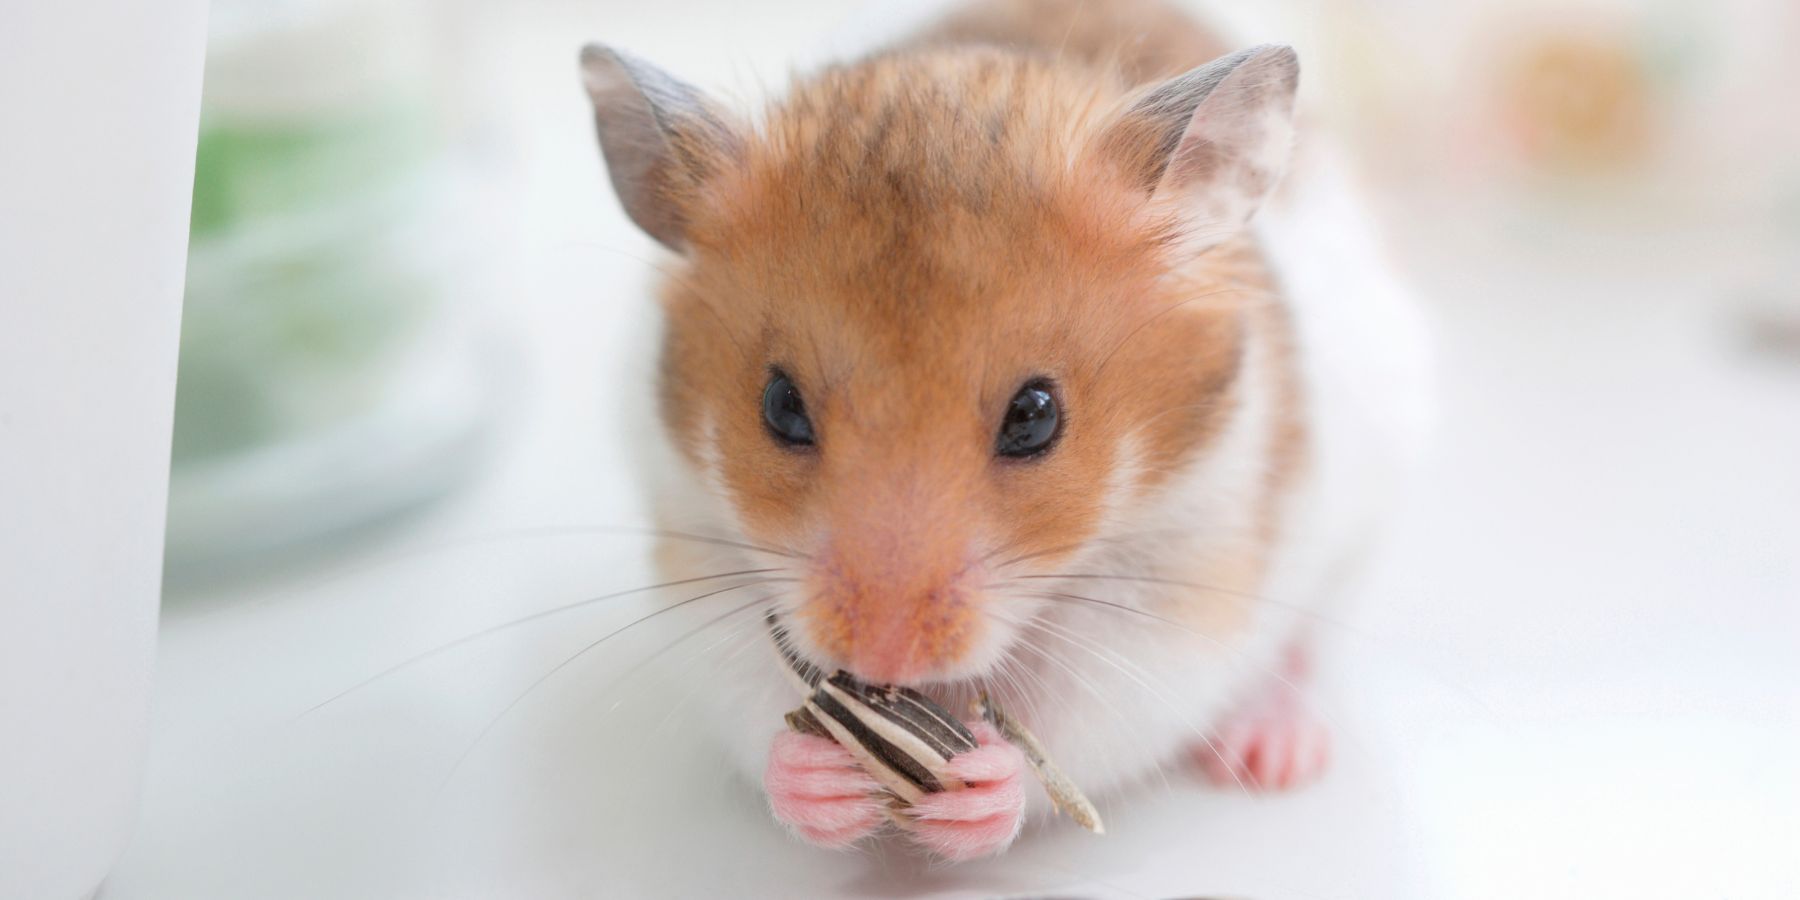 What Do Dwarf Hamsters Love the Most?